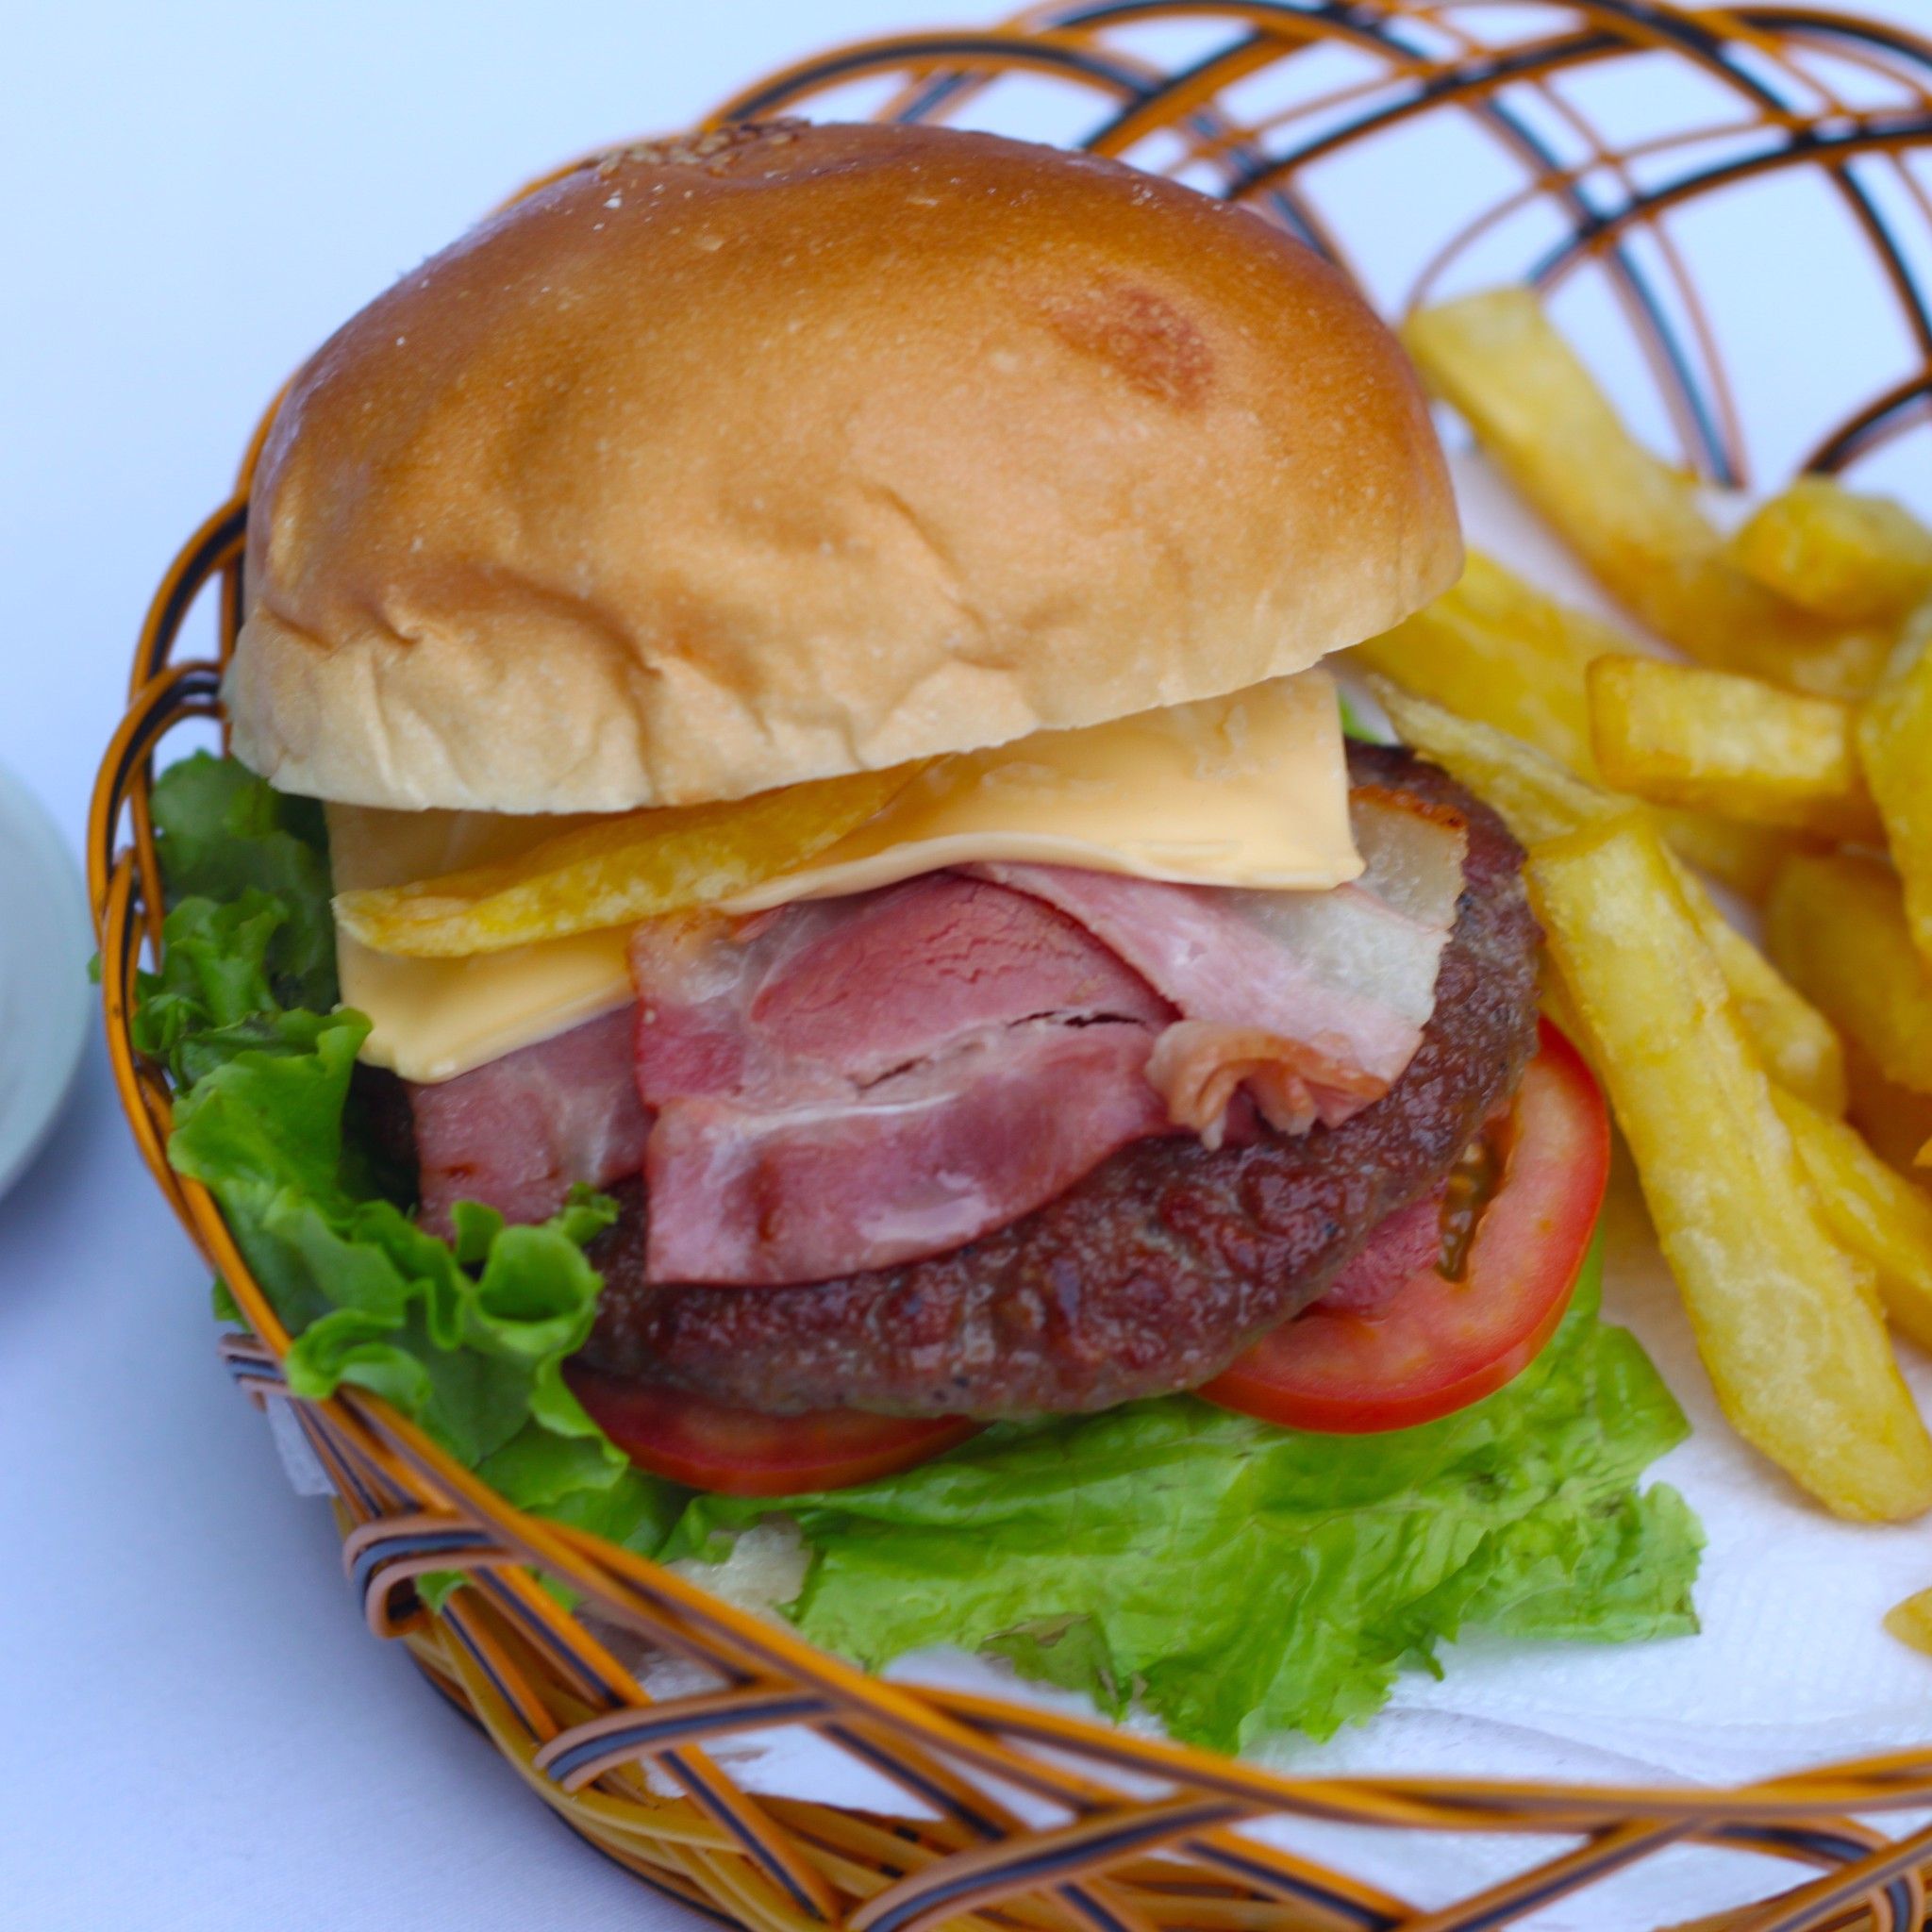  Burger with Meat ball  (beef) + Cheese - Burger Bò 